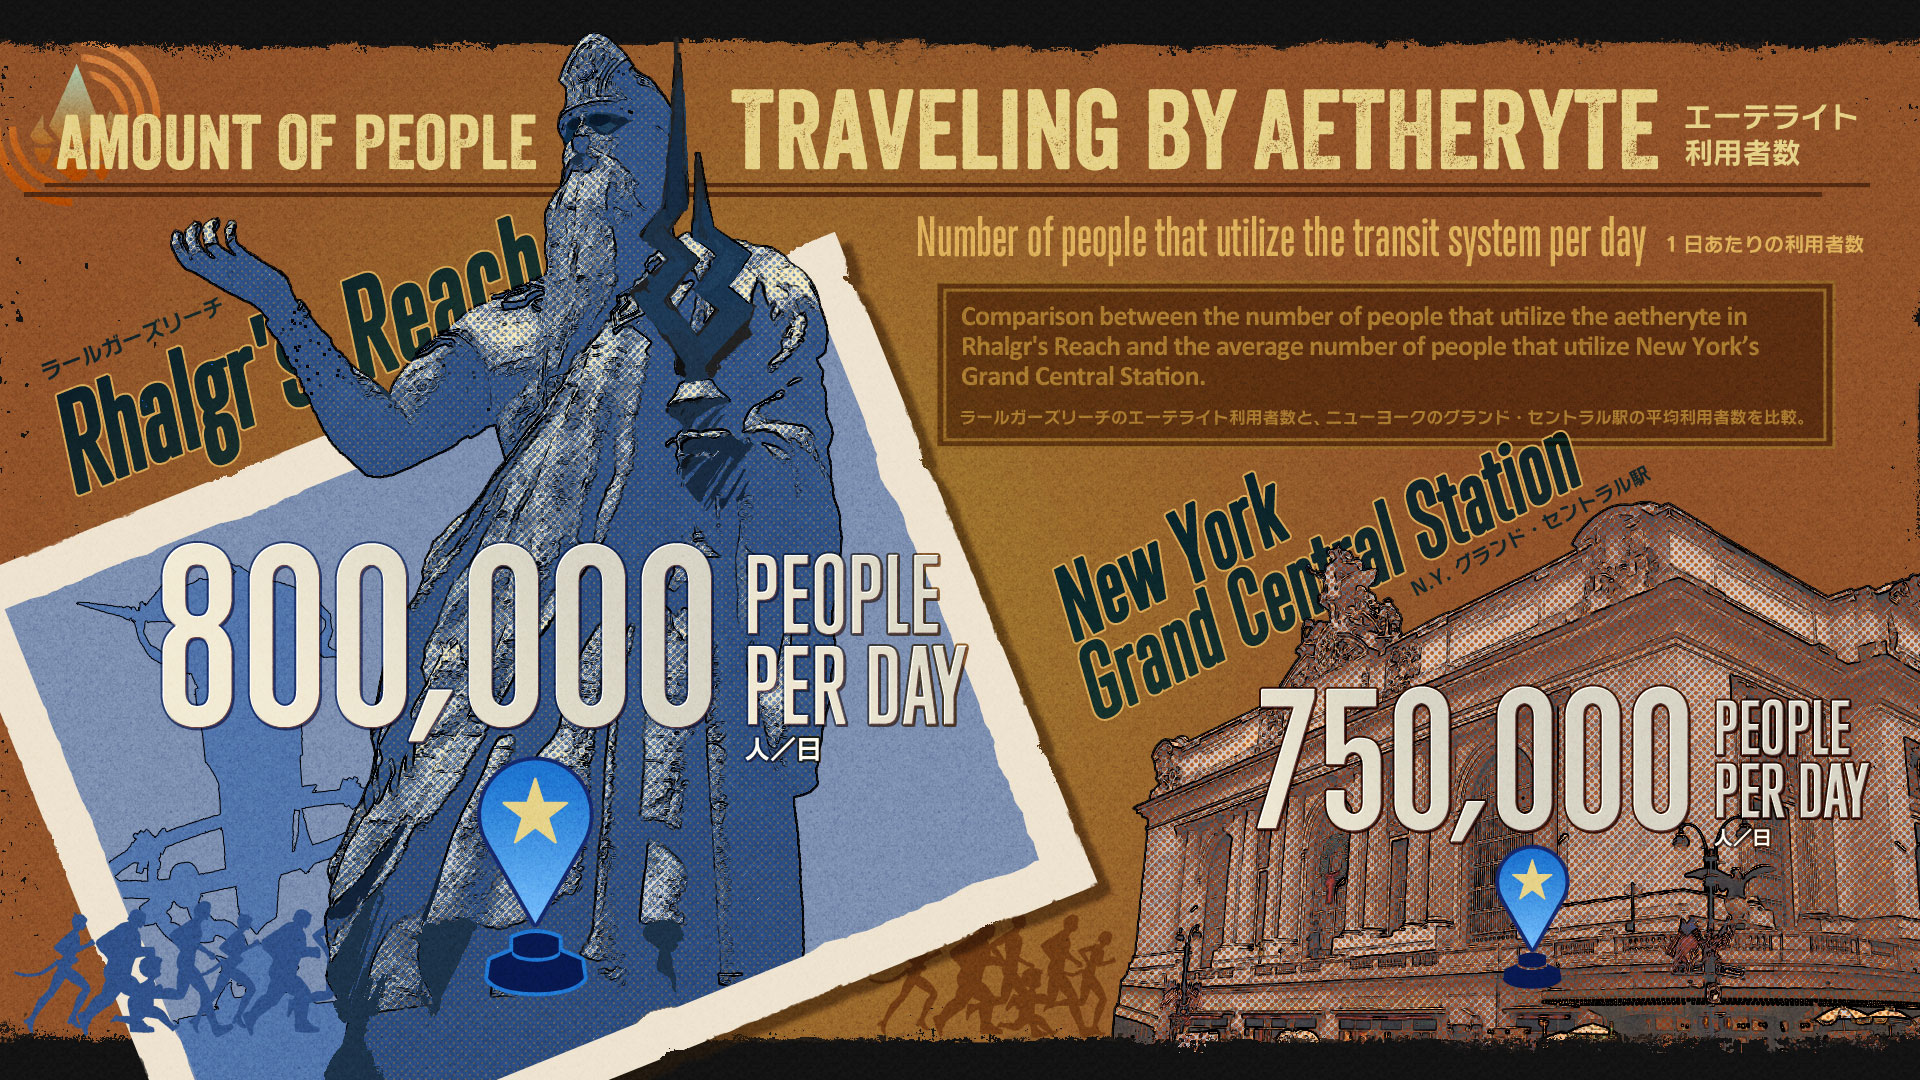 Amount of people traveling by aetheryte